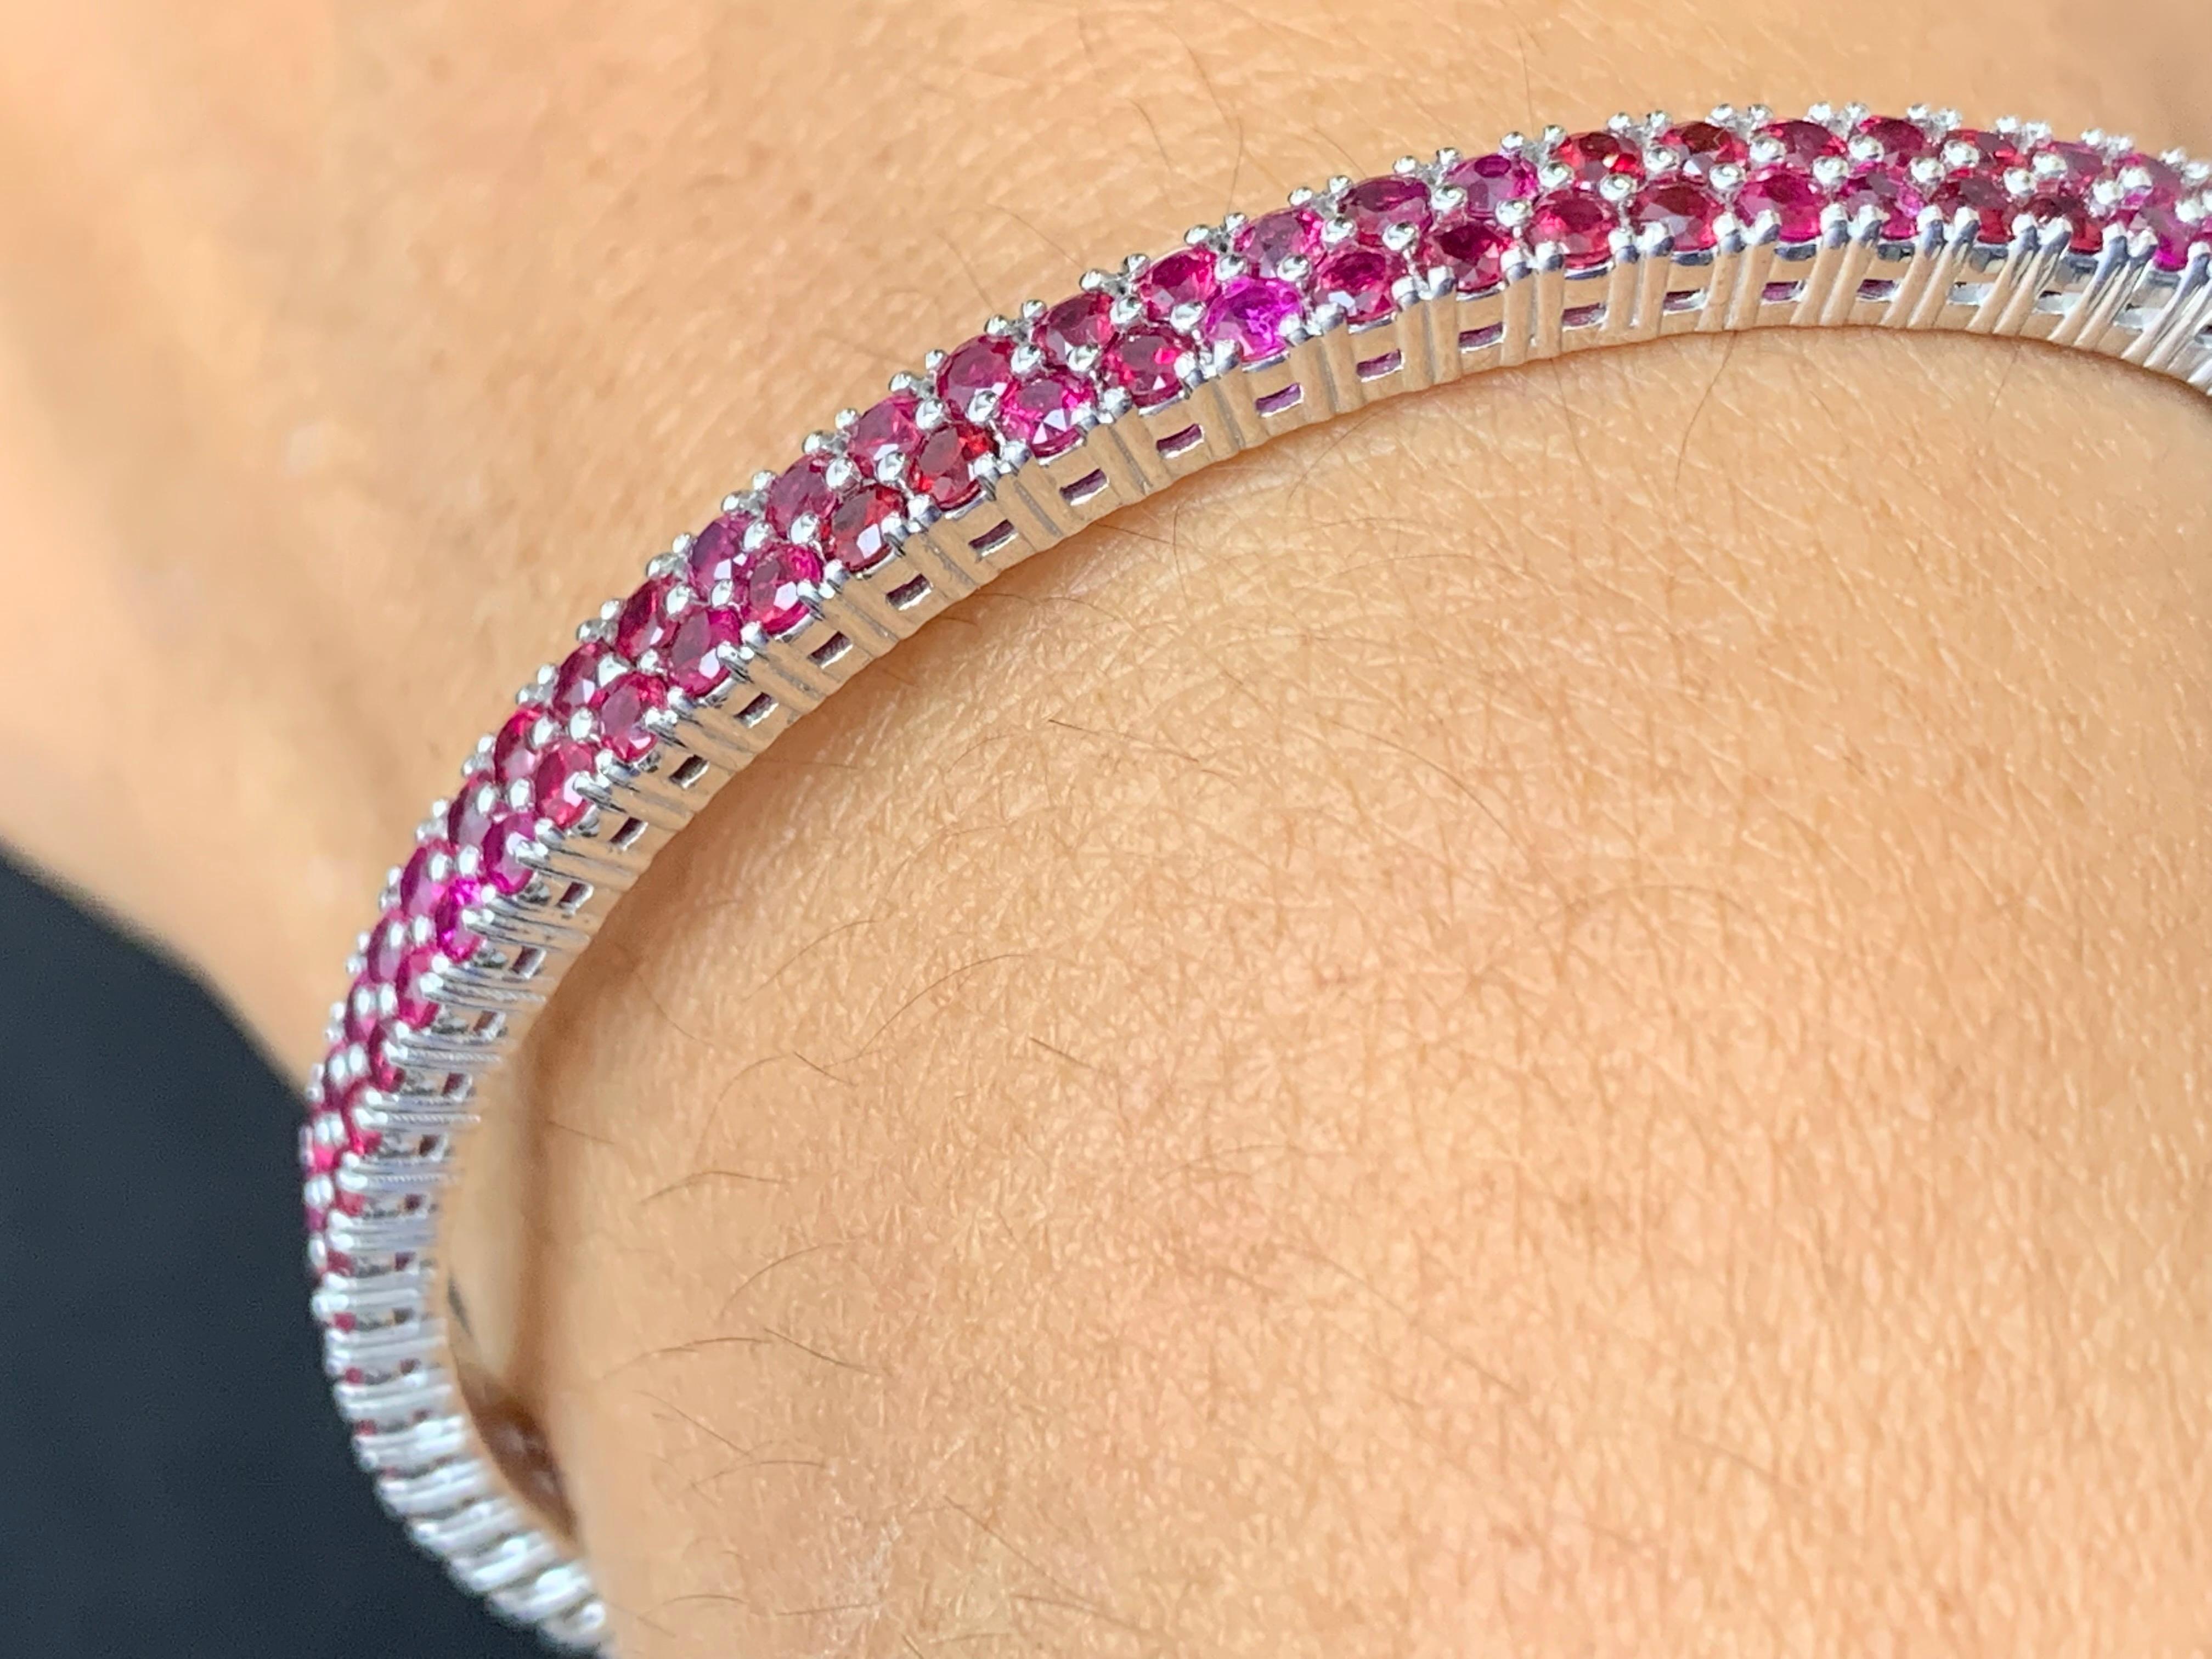 A simple but elegant 2-row bangle with 75 round cut Rubies weighing 3.53 carats total. Has a clasp to slip and wear the bangle securely. Made in 14k white gold.

Style available in different price ranges. Prices are based on your selection of the